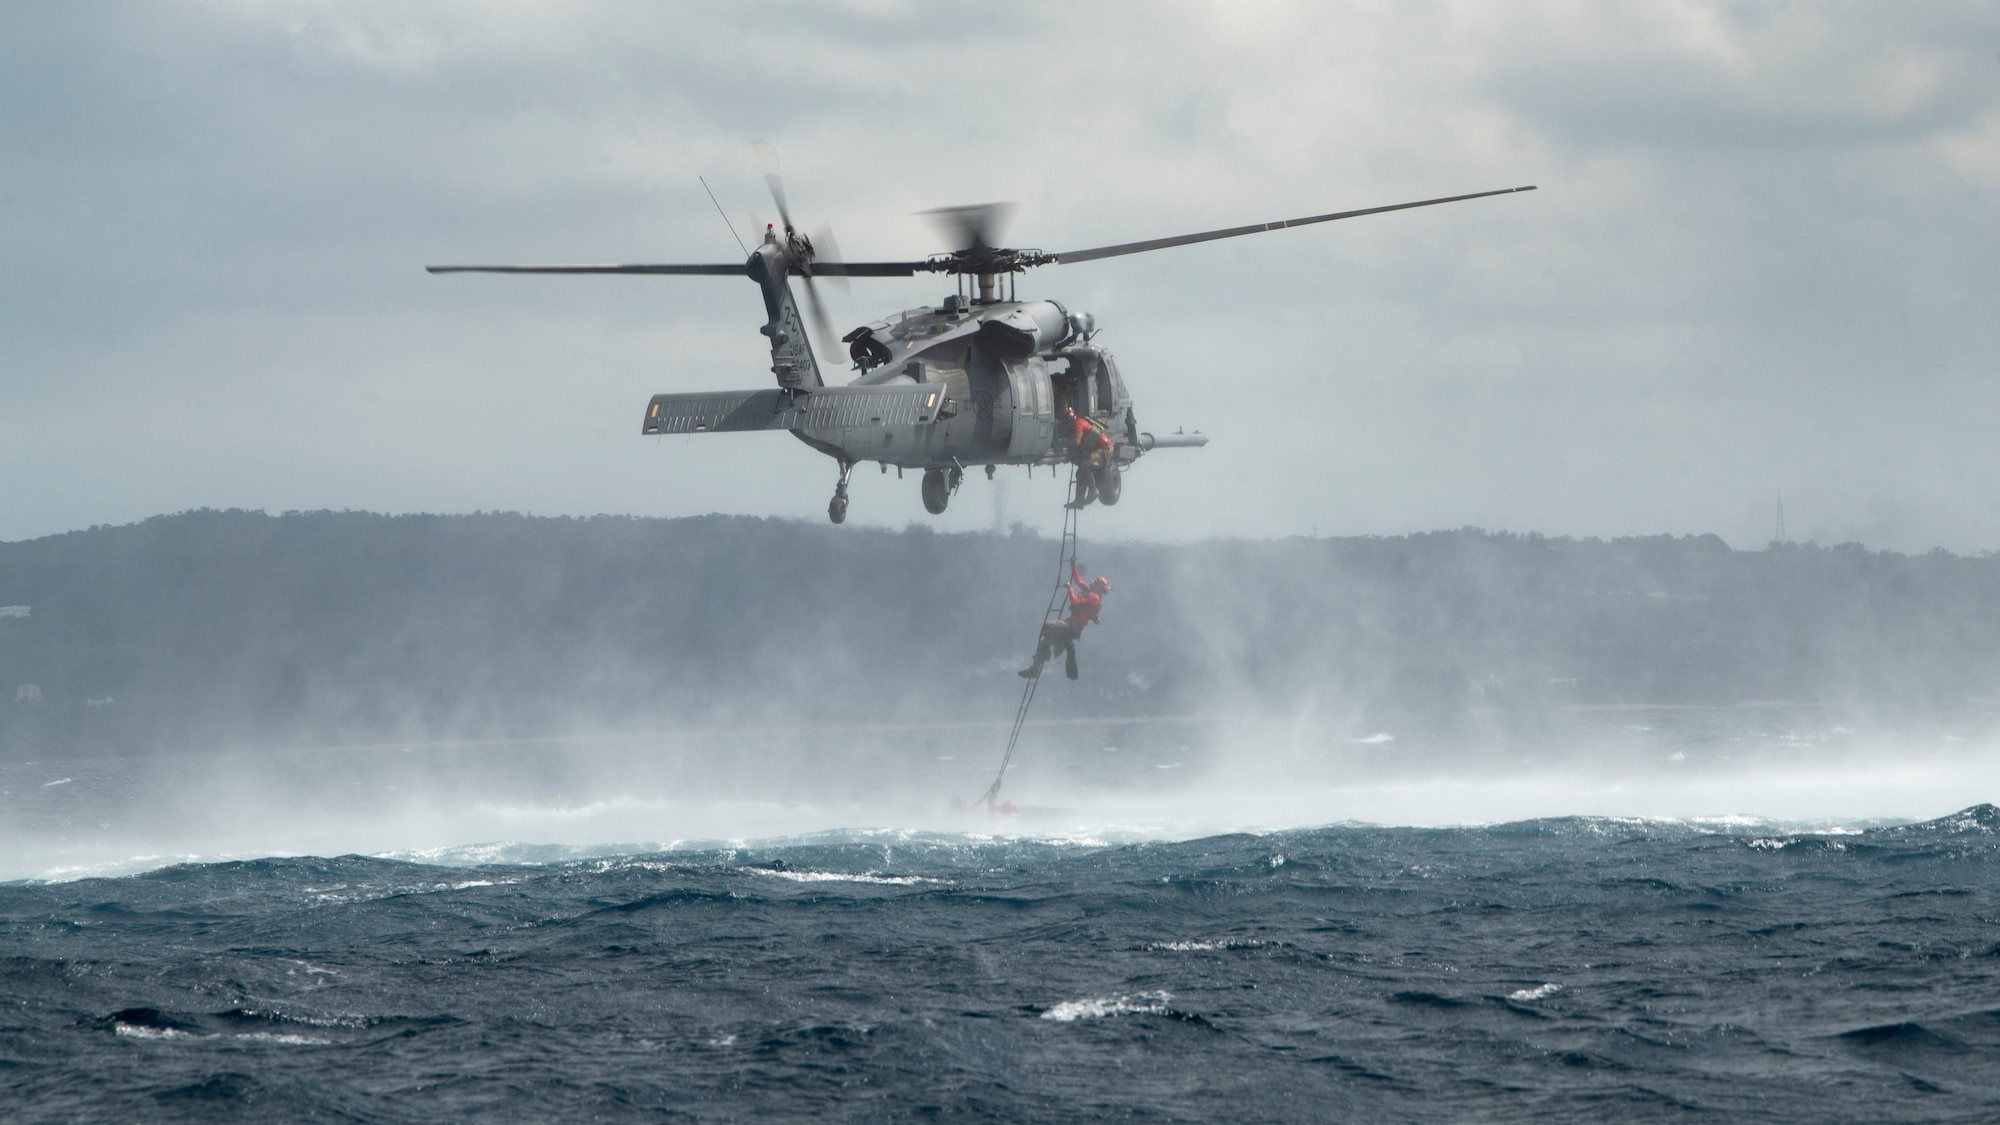 U.S. Air Force pararescuemen assigned to the 31st Rescue Squadron board an HH-60G Pave Hawk after completing an amphibious search and rescue training in the Pacific Ocean, Sept. 13, 2022. After reaching the extraction point, PJ’s were lifted from the water via hoist back into the aircraft. (U.S. Air Force photo by Senior Airman Jessi Roth)